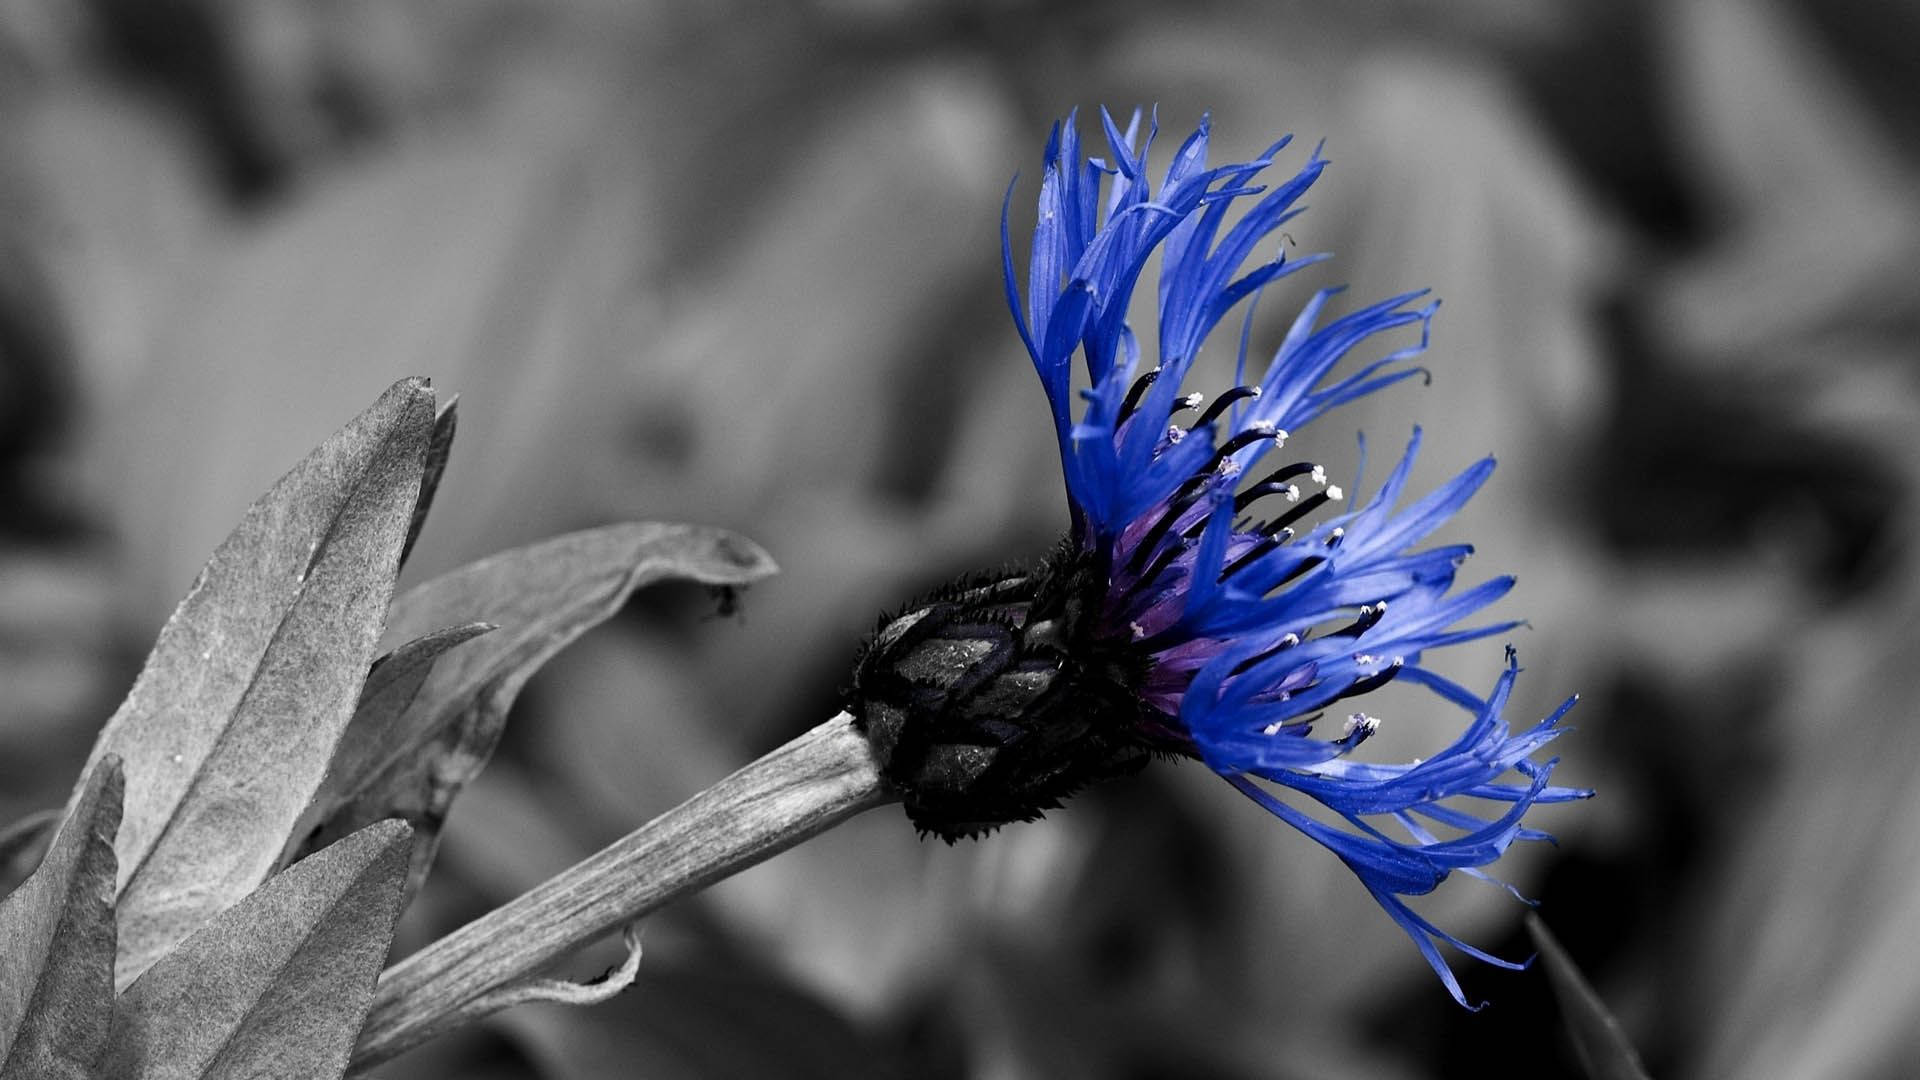 A beautiful blue glowing flower, vibrating with life. Wallpaper